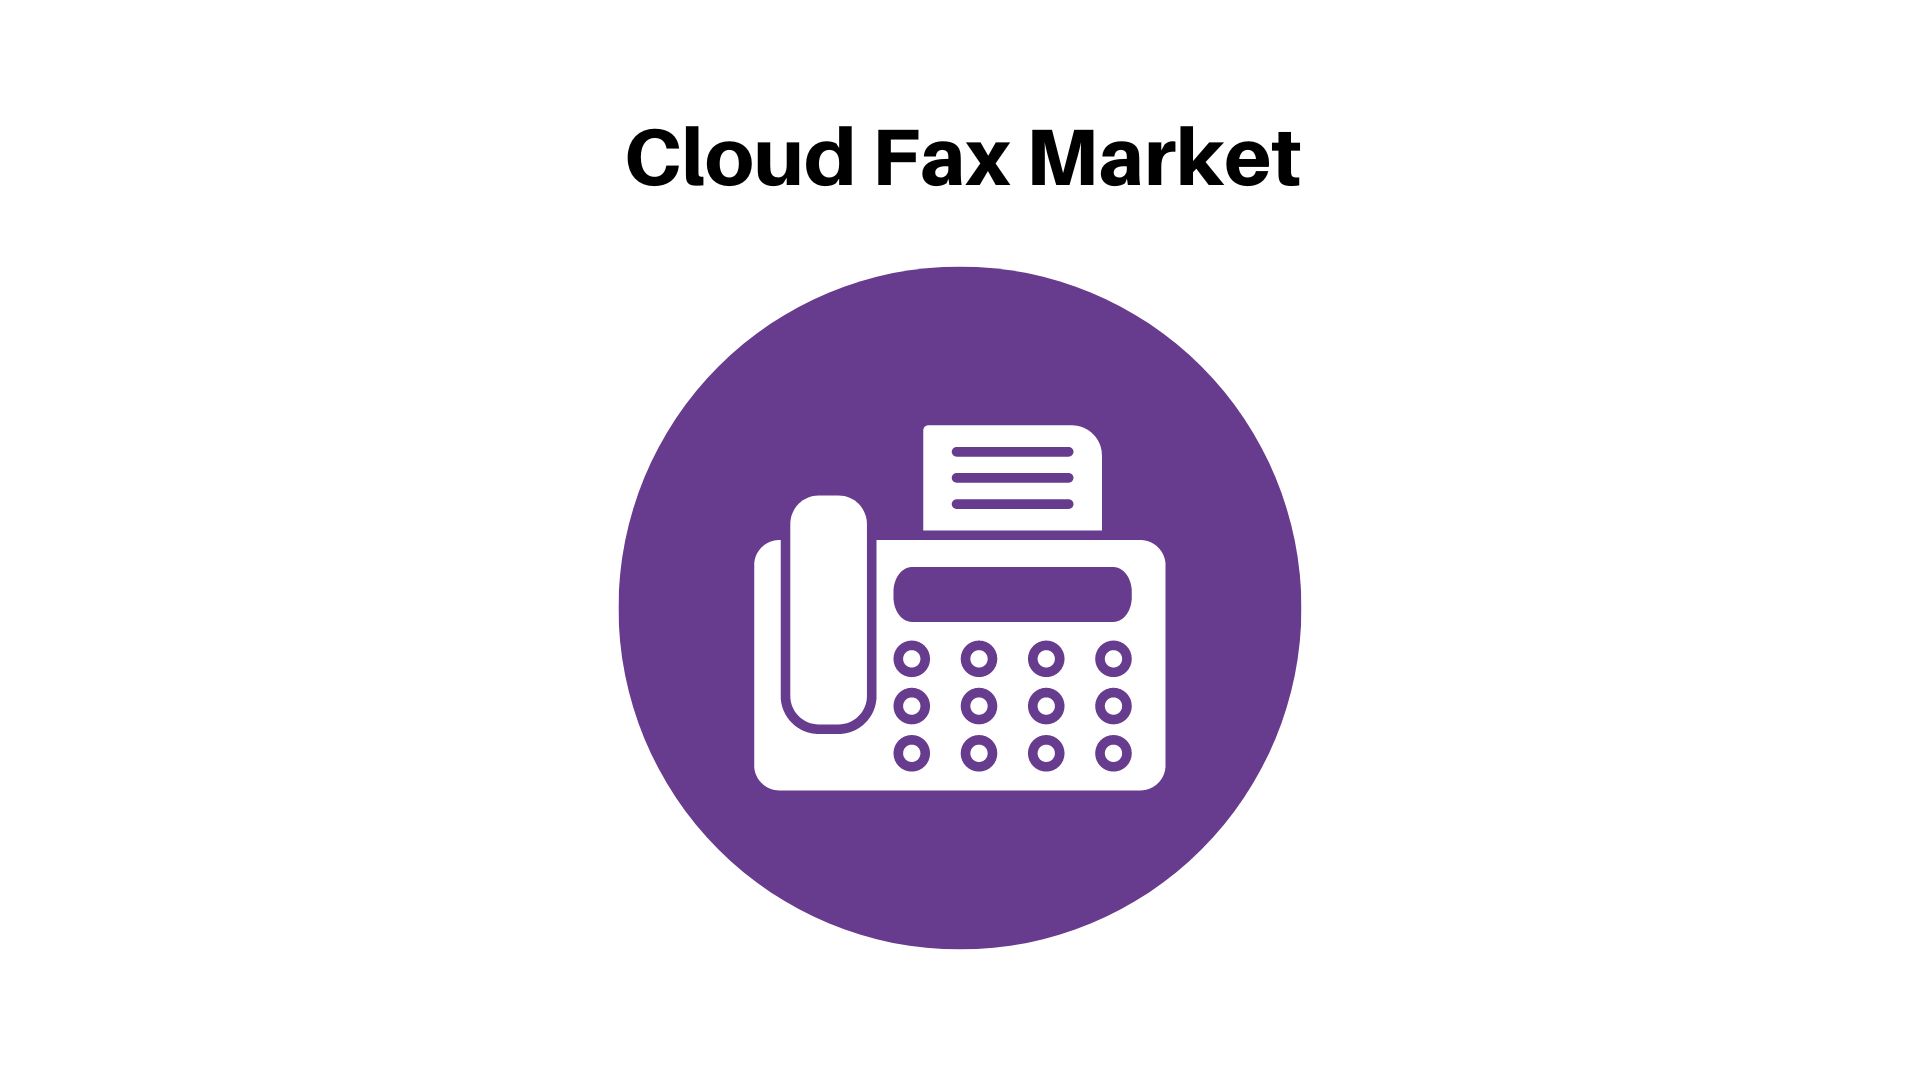 Cloud Fax Market Value to Hit USD 2053.60 billion by 2033 | CAGR of 10.3%